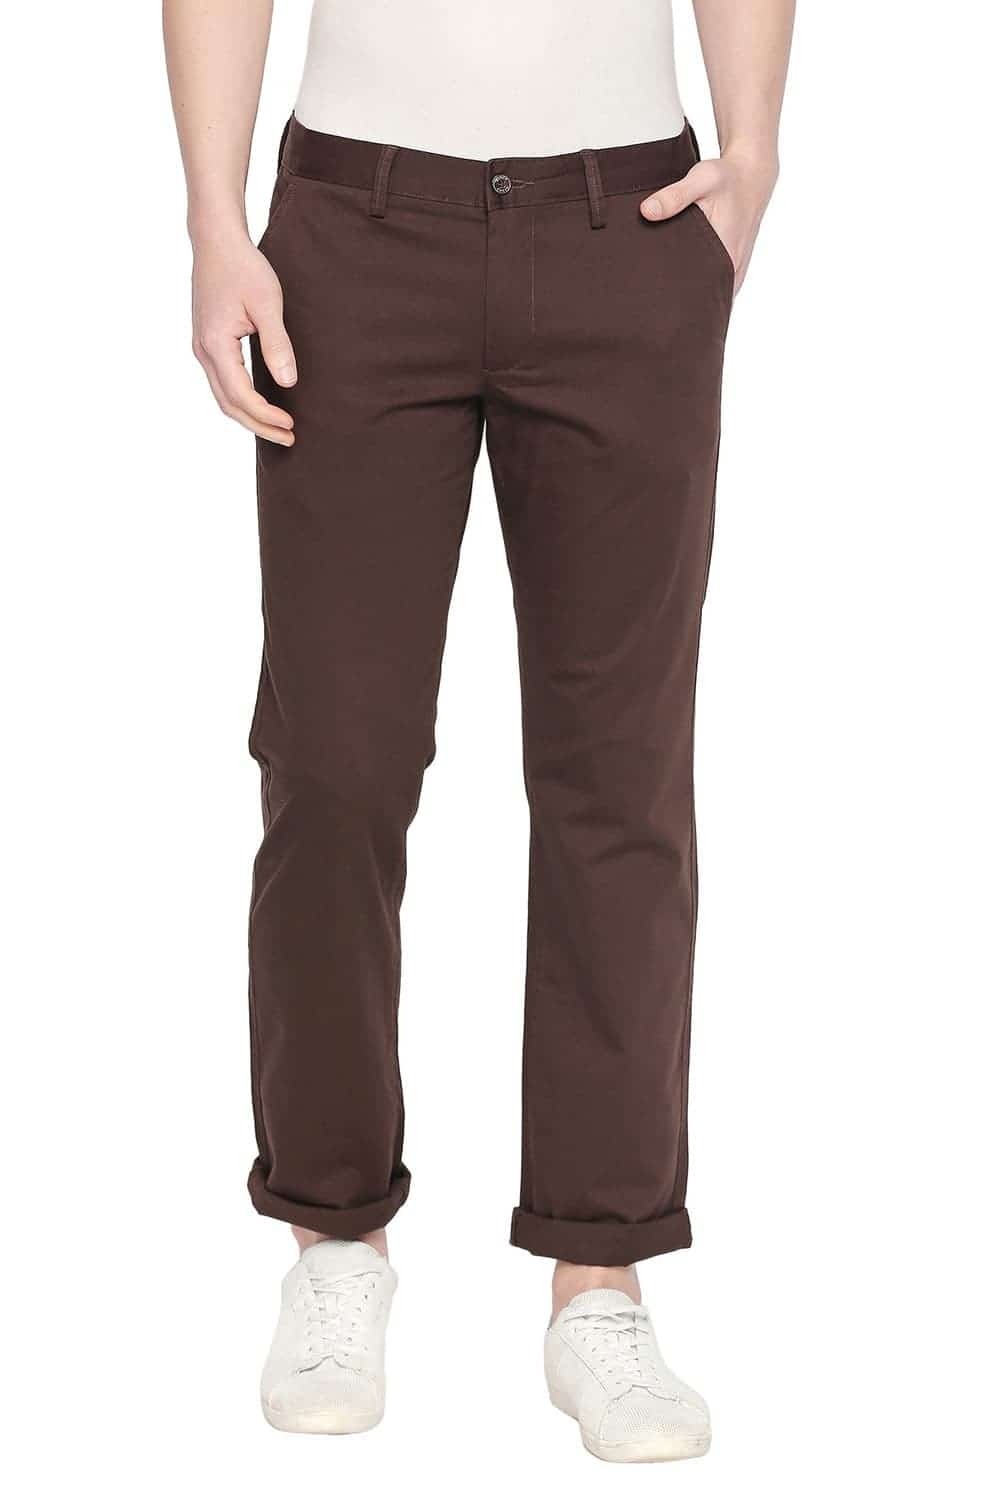 Basics | Basics Tapered Fit Delicioso Stretch Trouser